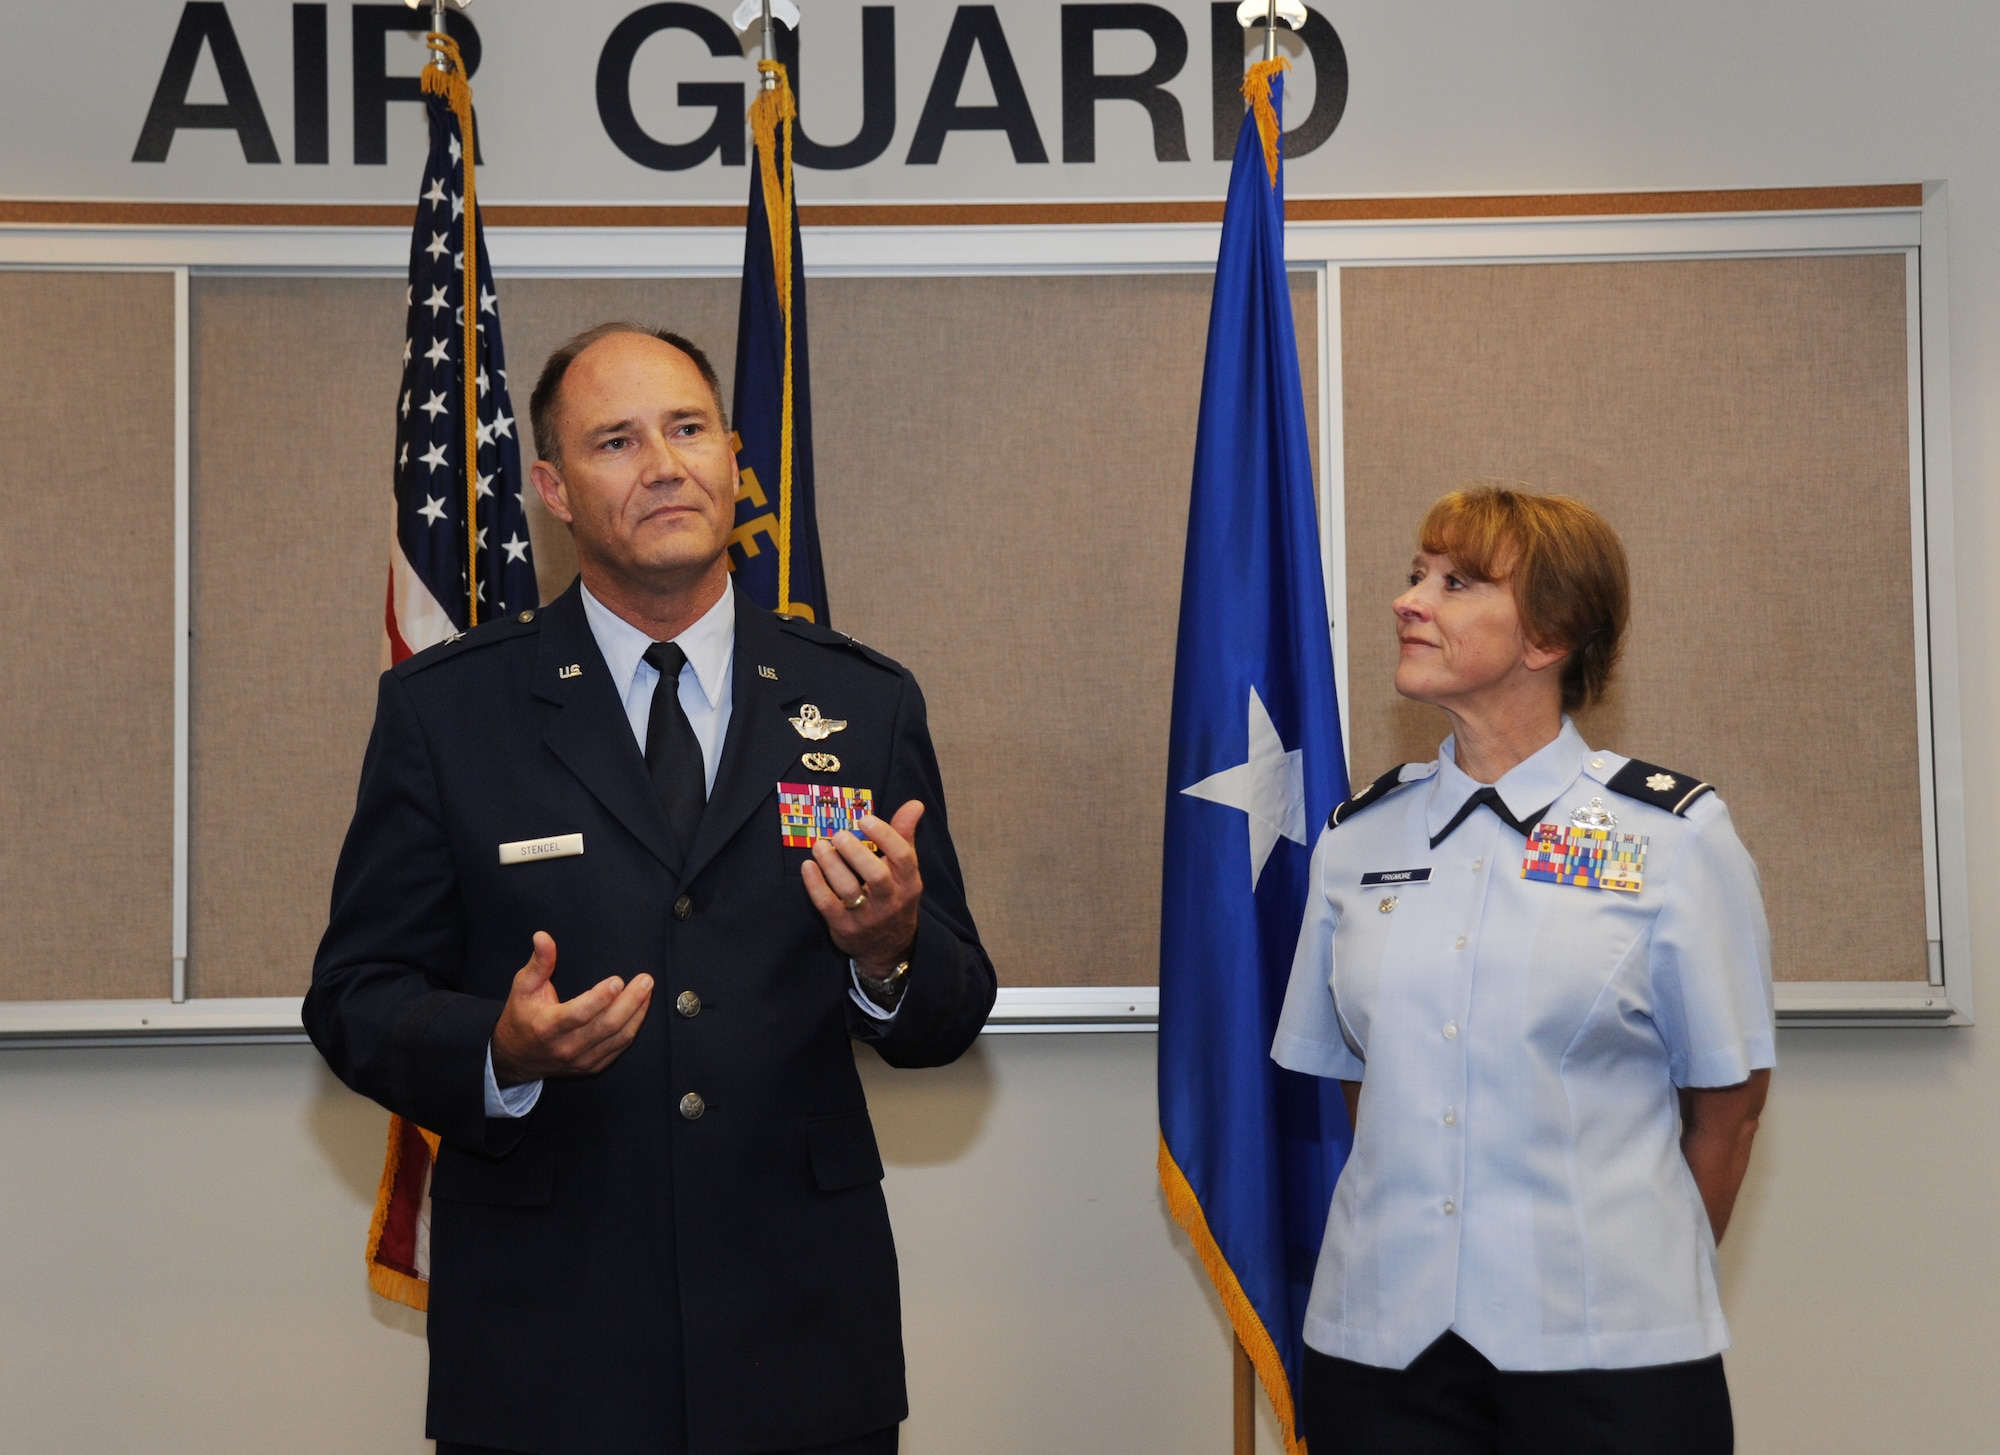 Brig. Gen. Michael Stencel, Commander of the Oregon Air National Guard, left, address those in attendance to the promotion and Lt. Col. Donna Prigmore, right, and the Change of Command ceremony for the 142nd Fighter Wing Mission Support Group held at the Portland Air National Guard Base, Ore., Aug. 3, 2014. (U.S. Air National Guard photo by Tech. Sgt. John Hughel, 142nd Fighter Wing Public Affairs/Released)